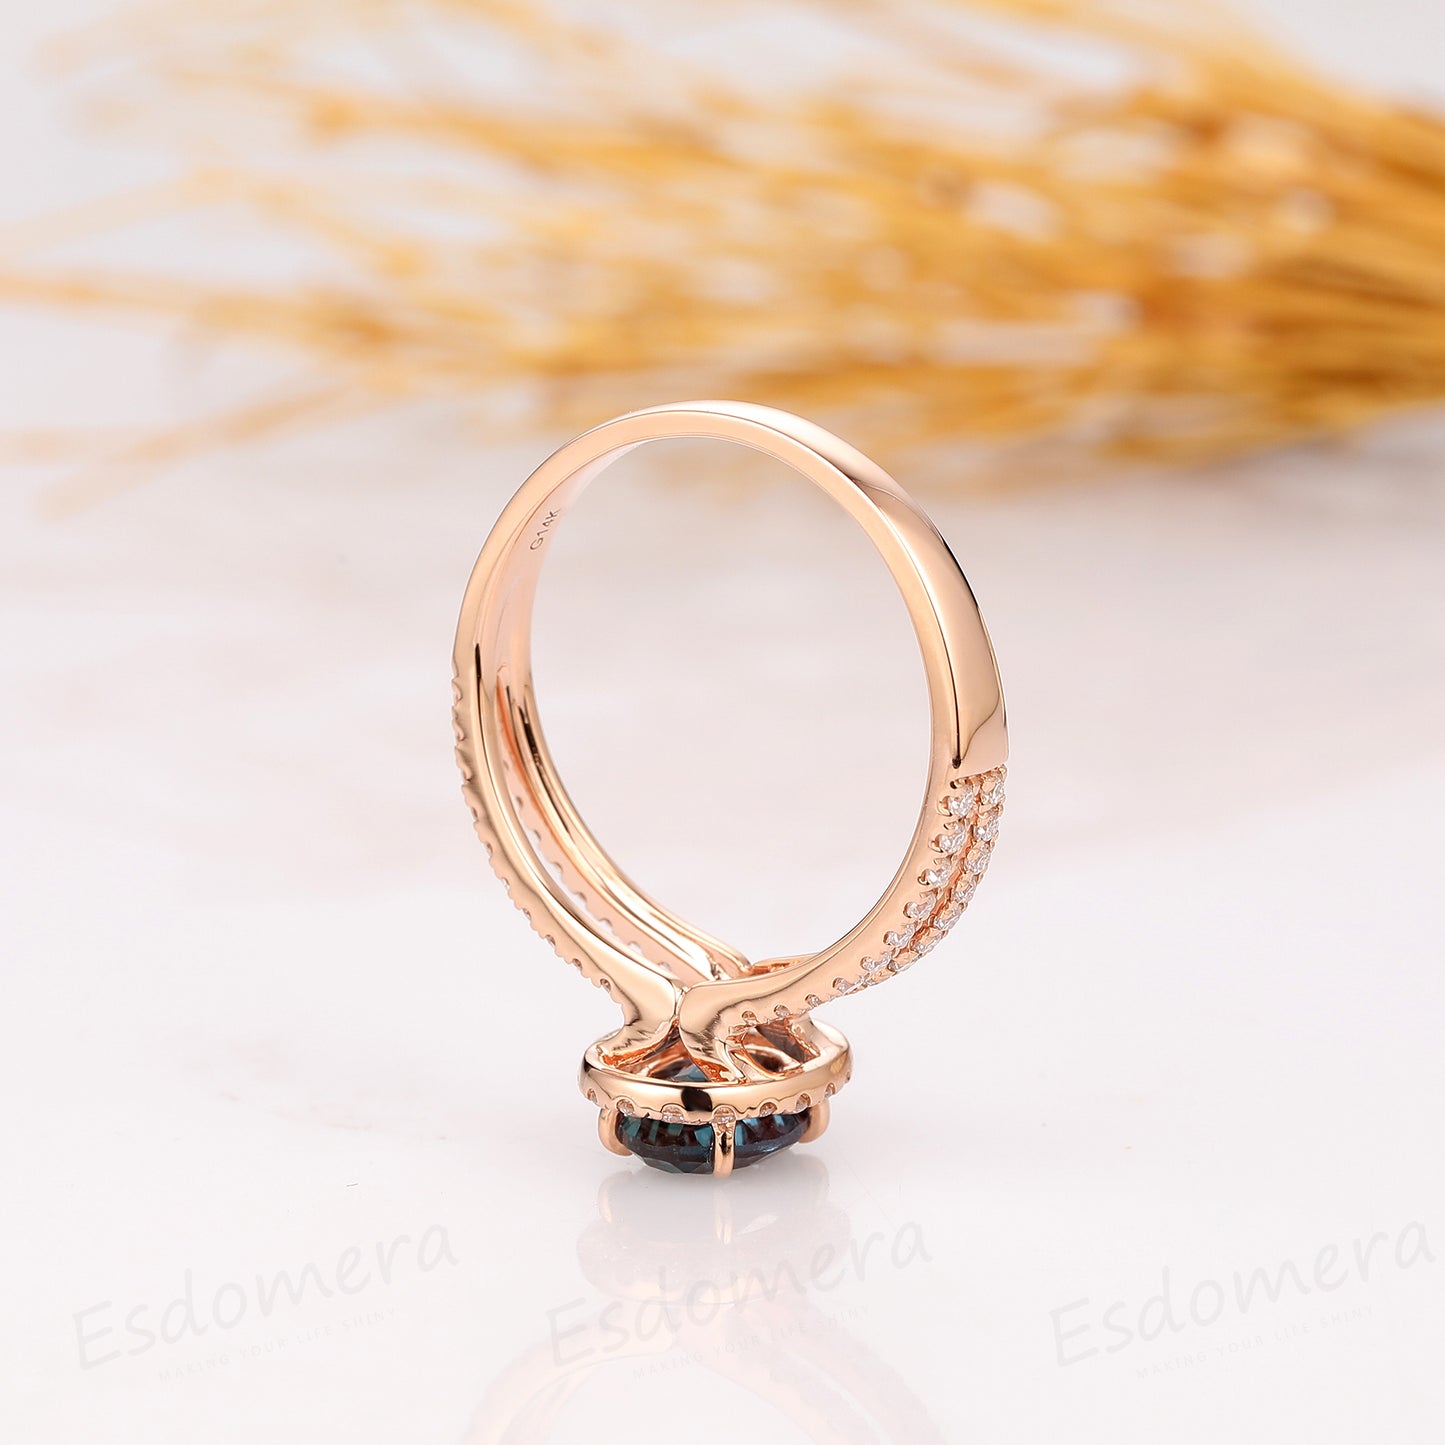 Oval Cut 5x7mm Alexandrite Ring, Halo Design Ring, 14k Rose Gold Ring